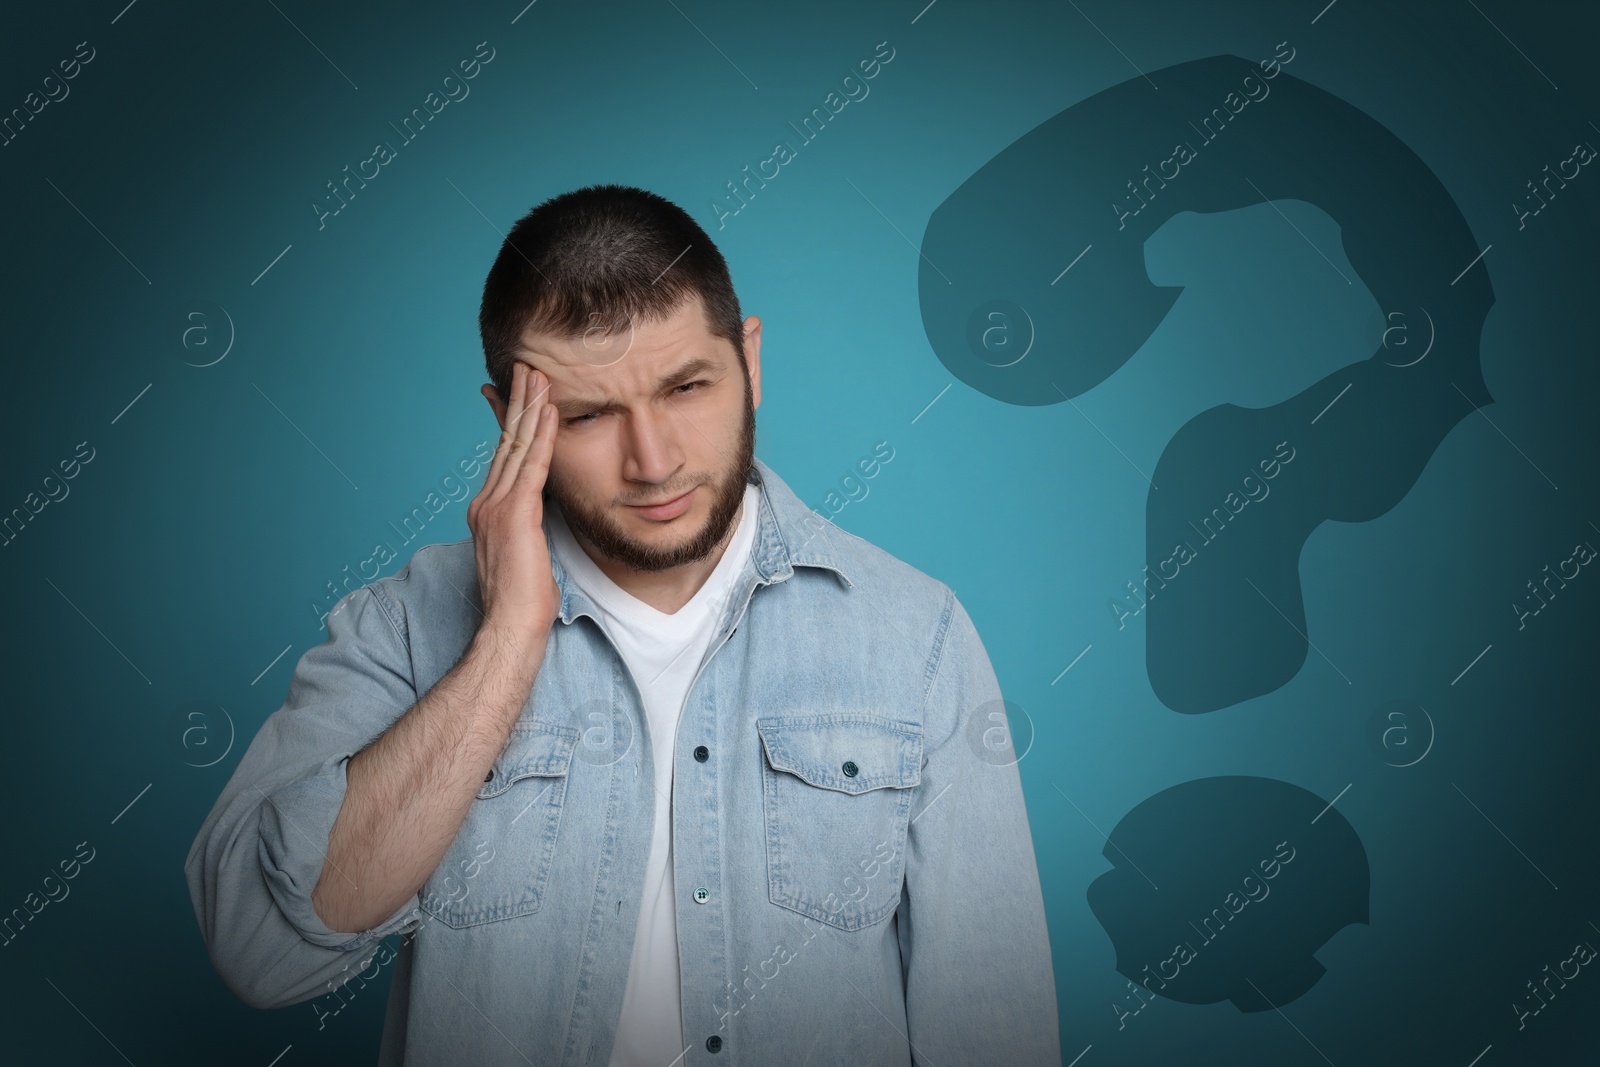 Image of Amnesia concept. Man trying to remember something. Question mark on color background symbolizing memory loss